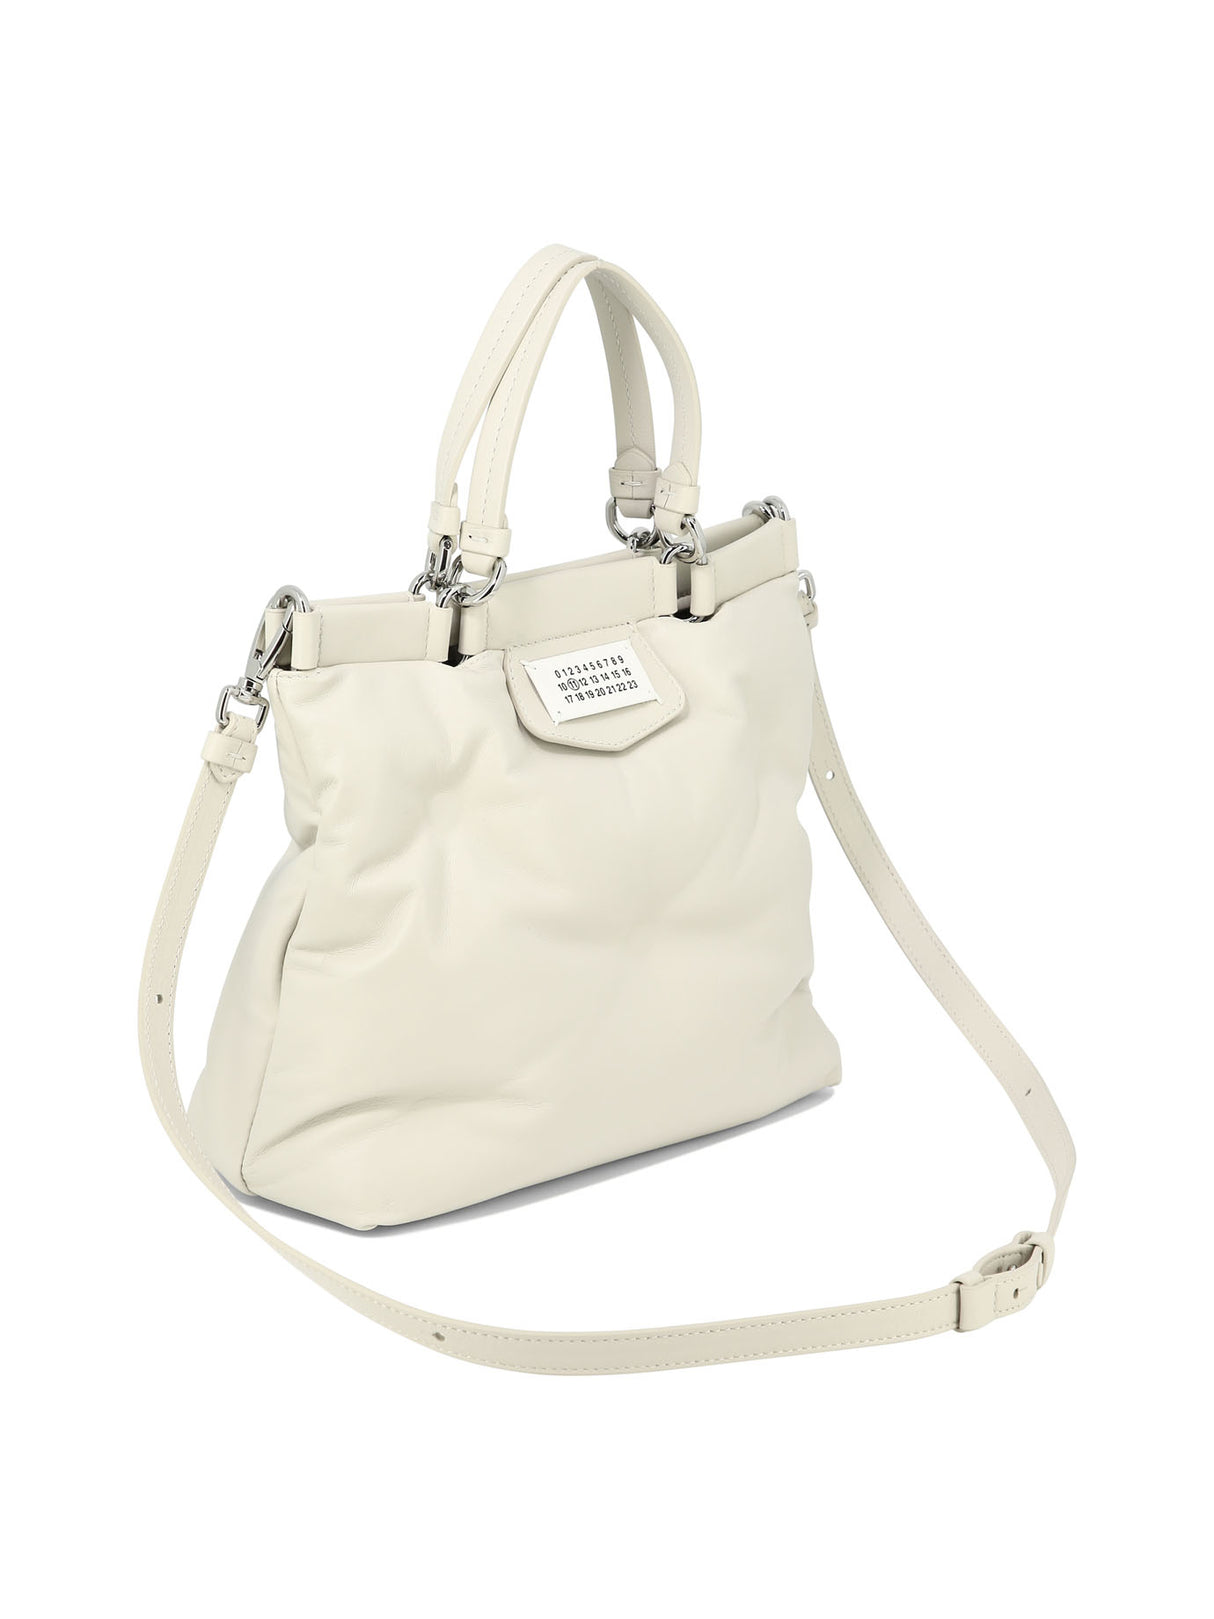 MAISON MARGIELA Chic Mini Glam Quilted Leather Handbag with Detachable Strap - White